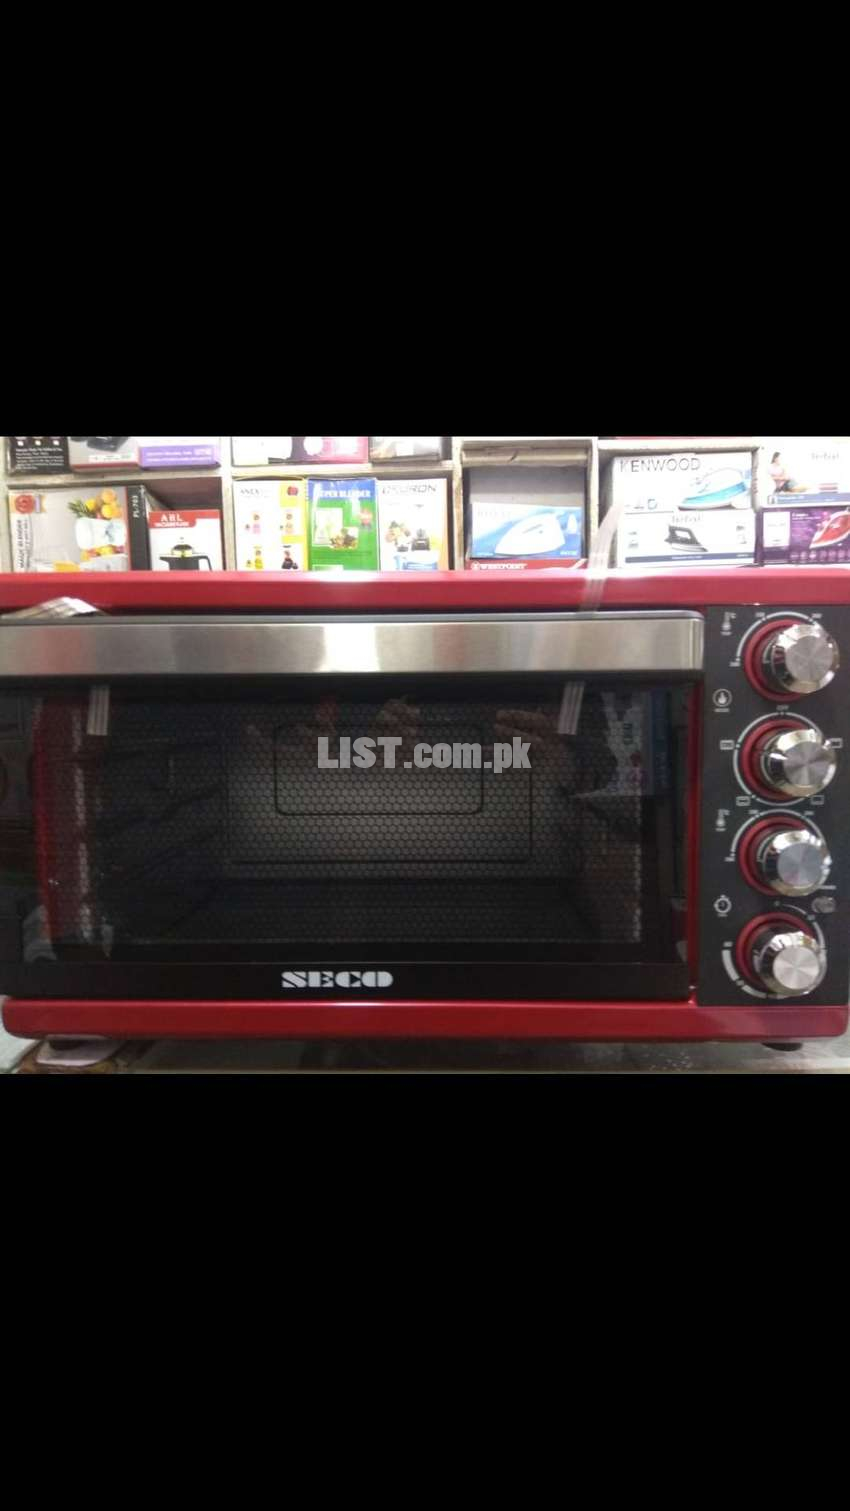 Original Japanese 45 Liter Electric oven /baking oven /Oven toaster